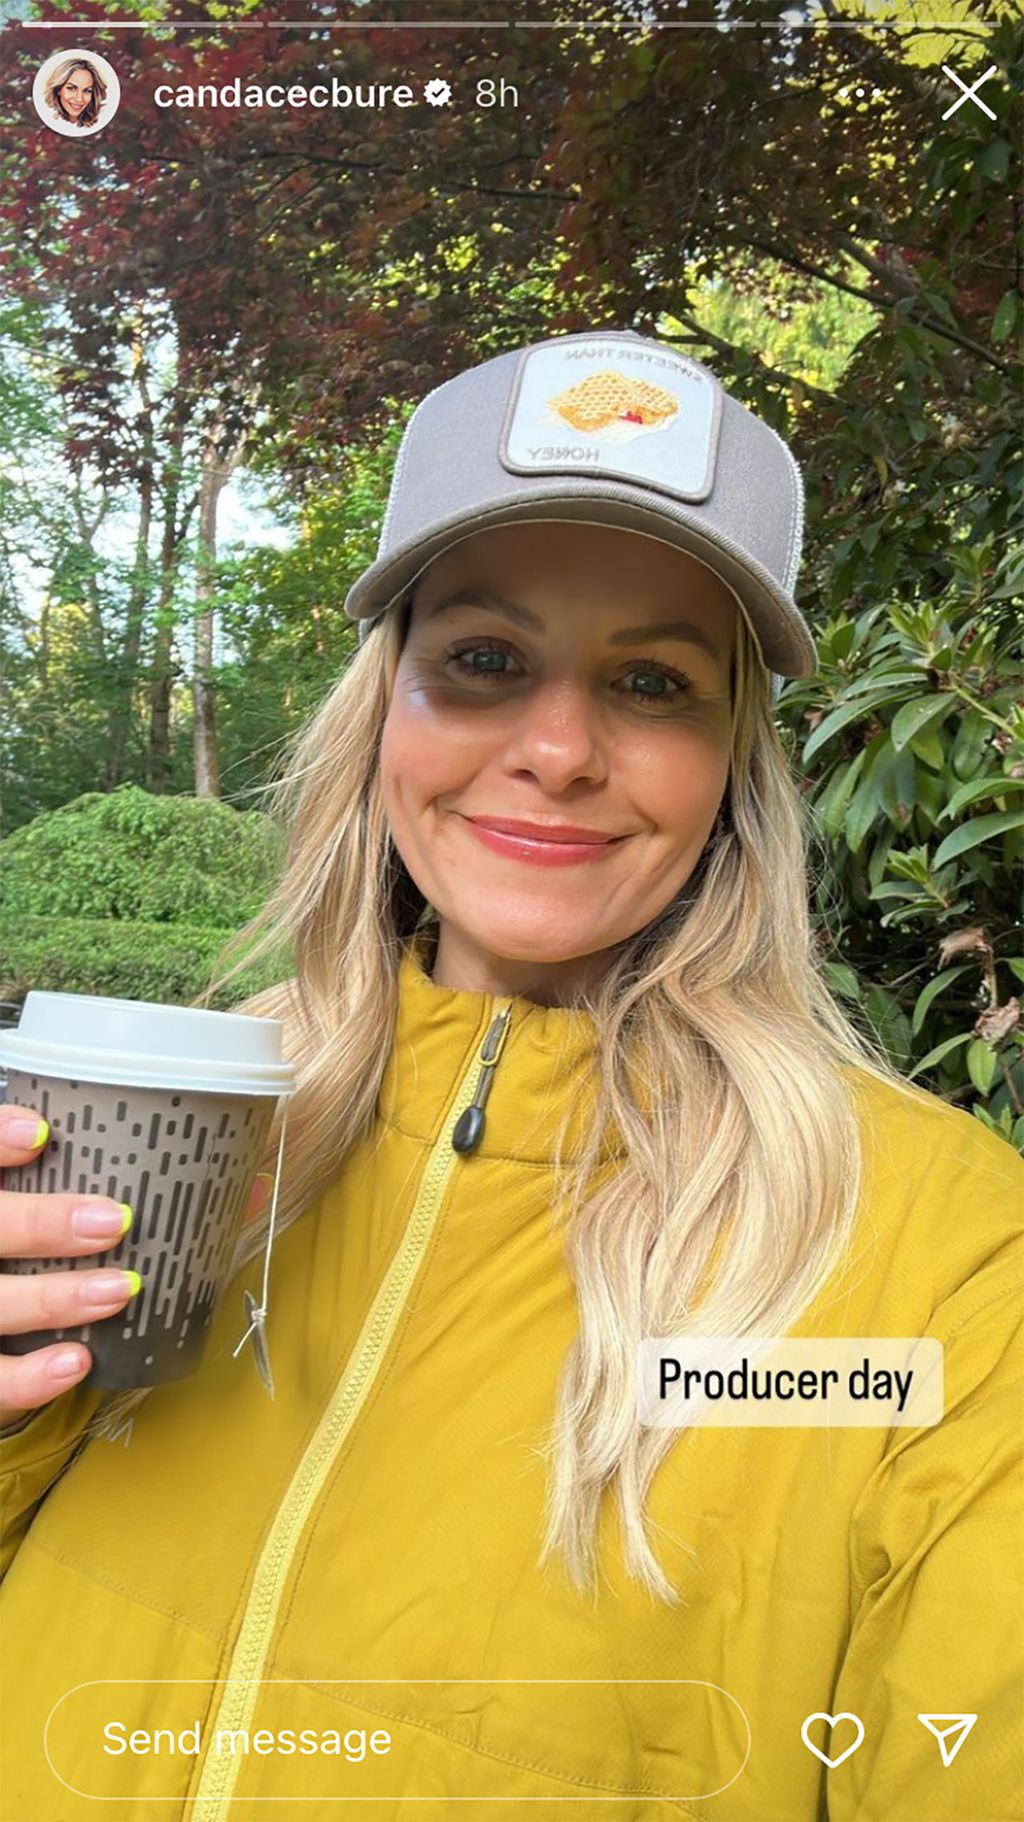 Candace Cameron Bure Takes Fans Behind The Scenes On The Set Of Her New